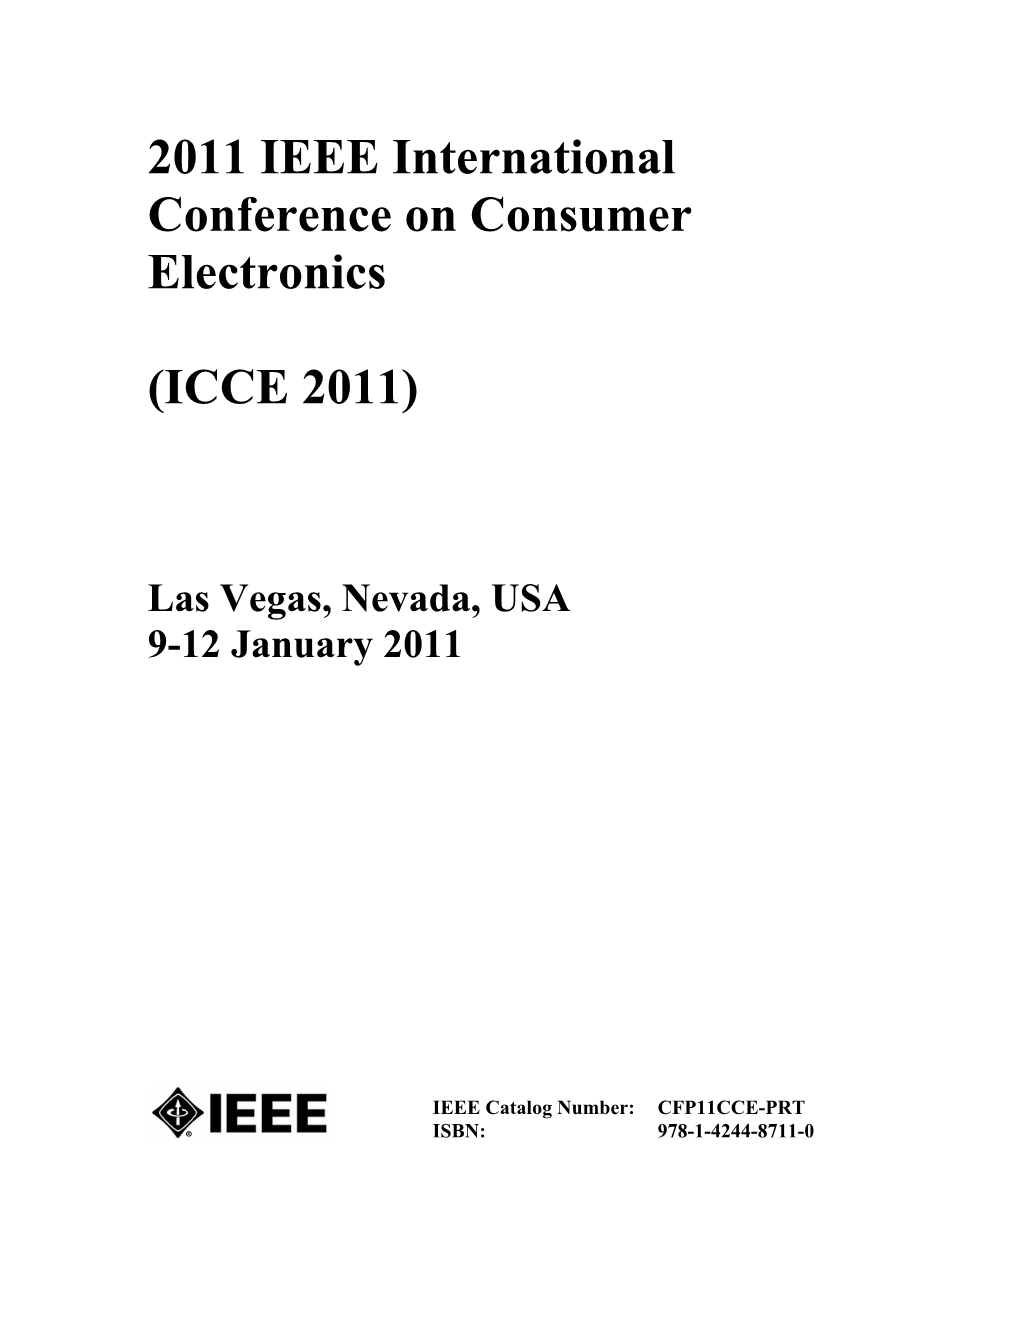 2011 IEEE International Conference on Consumer Electronics